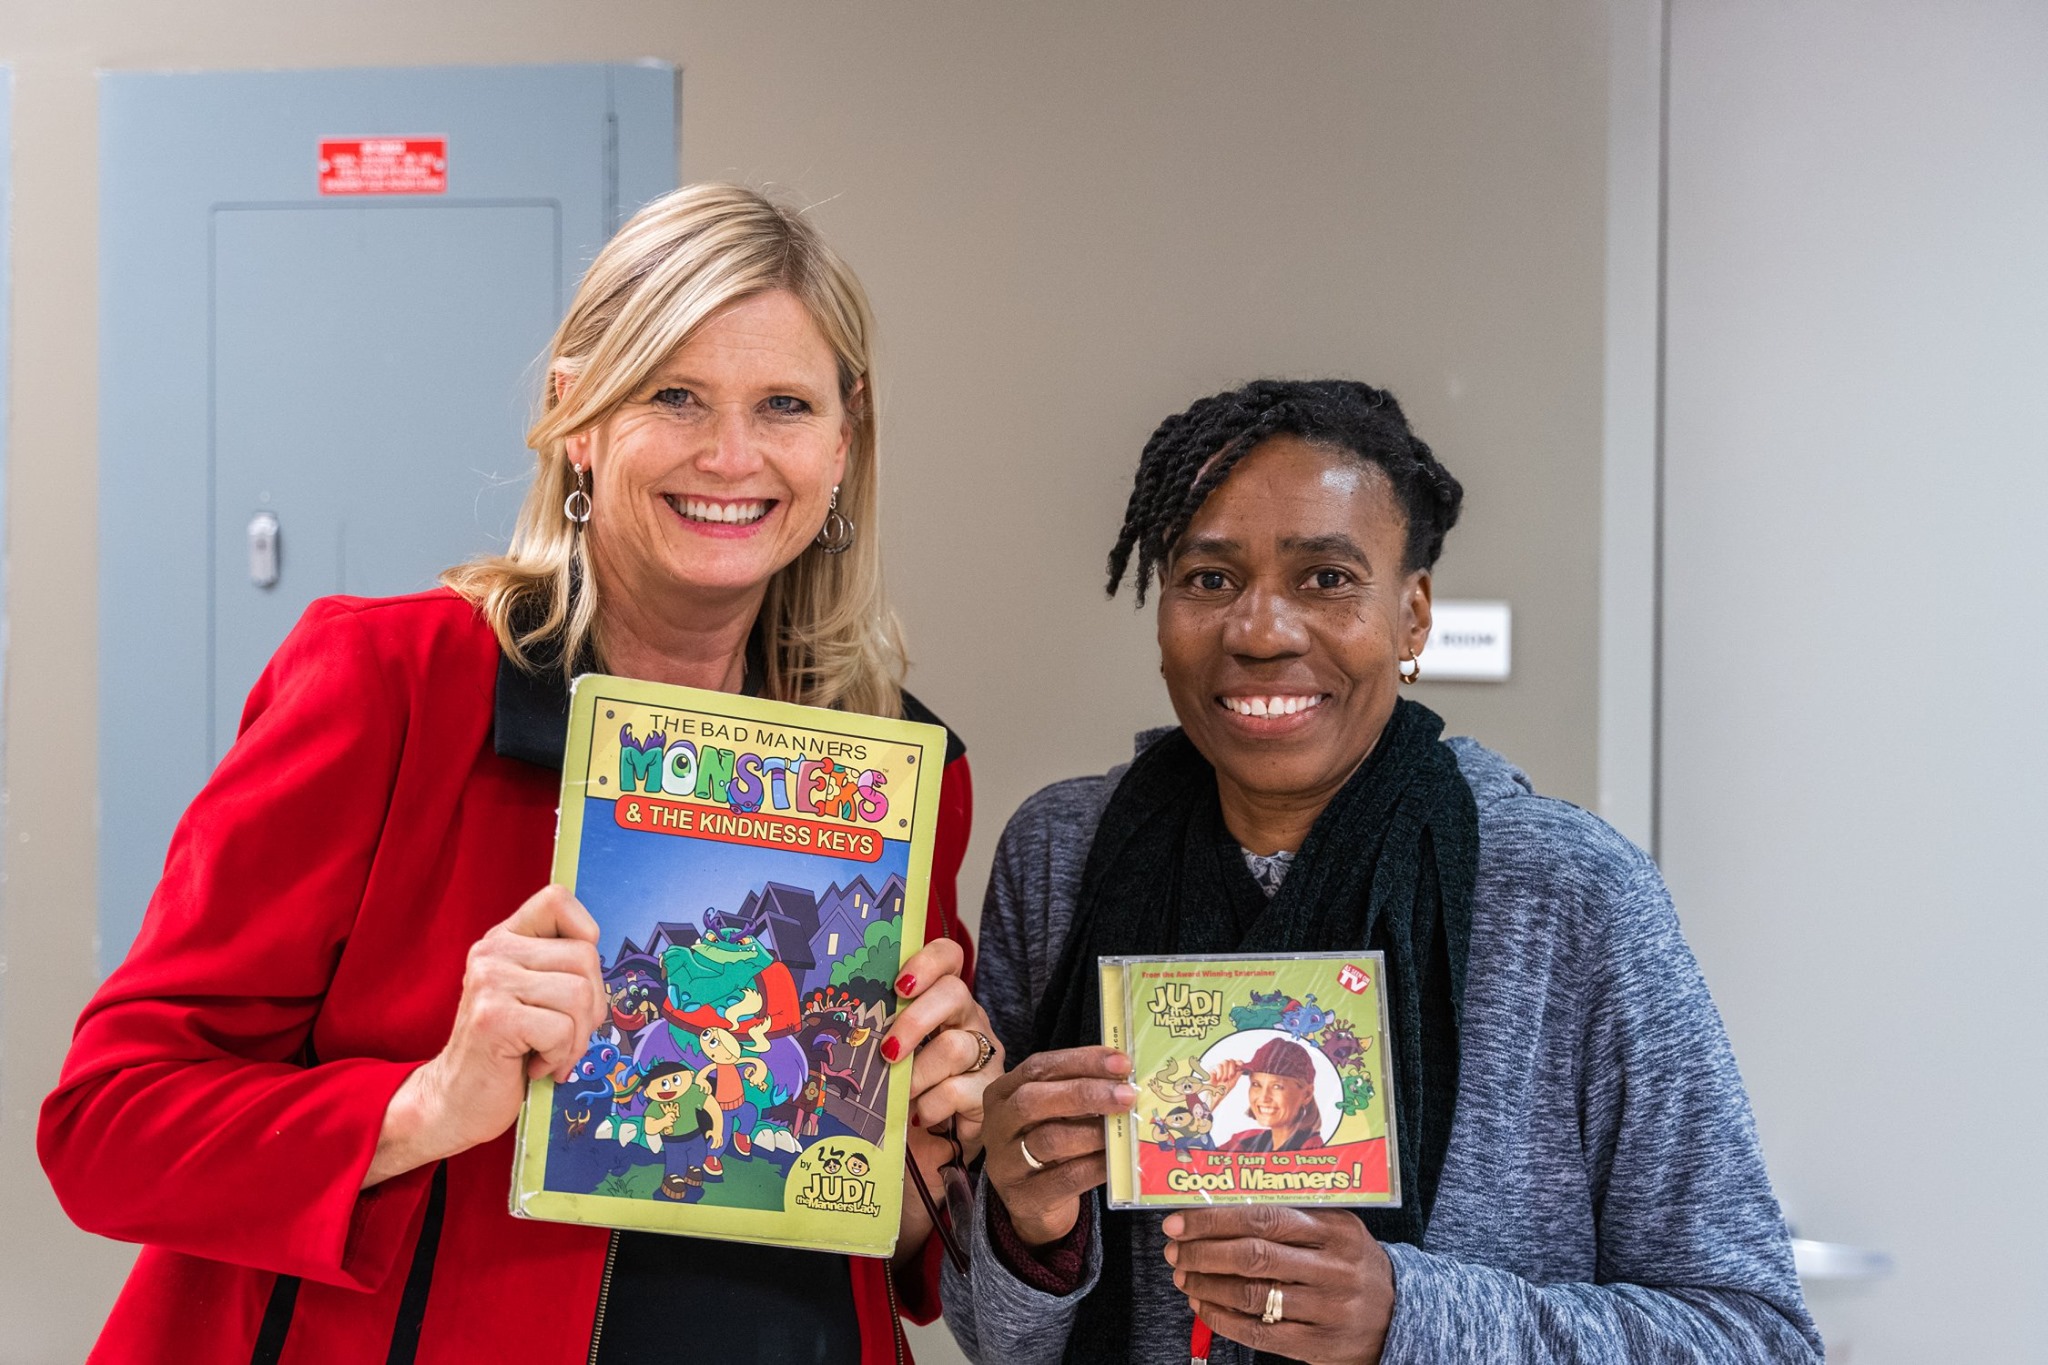 Two participants holding a children book and a CD respectively